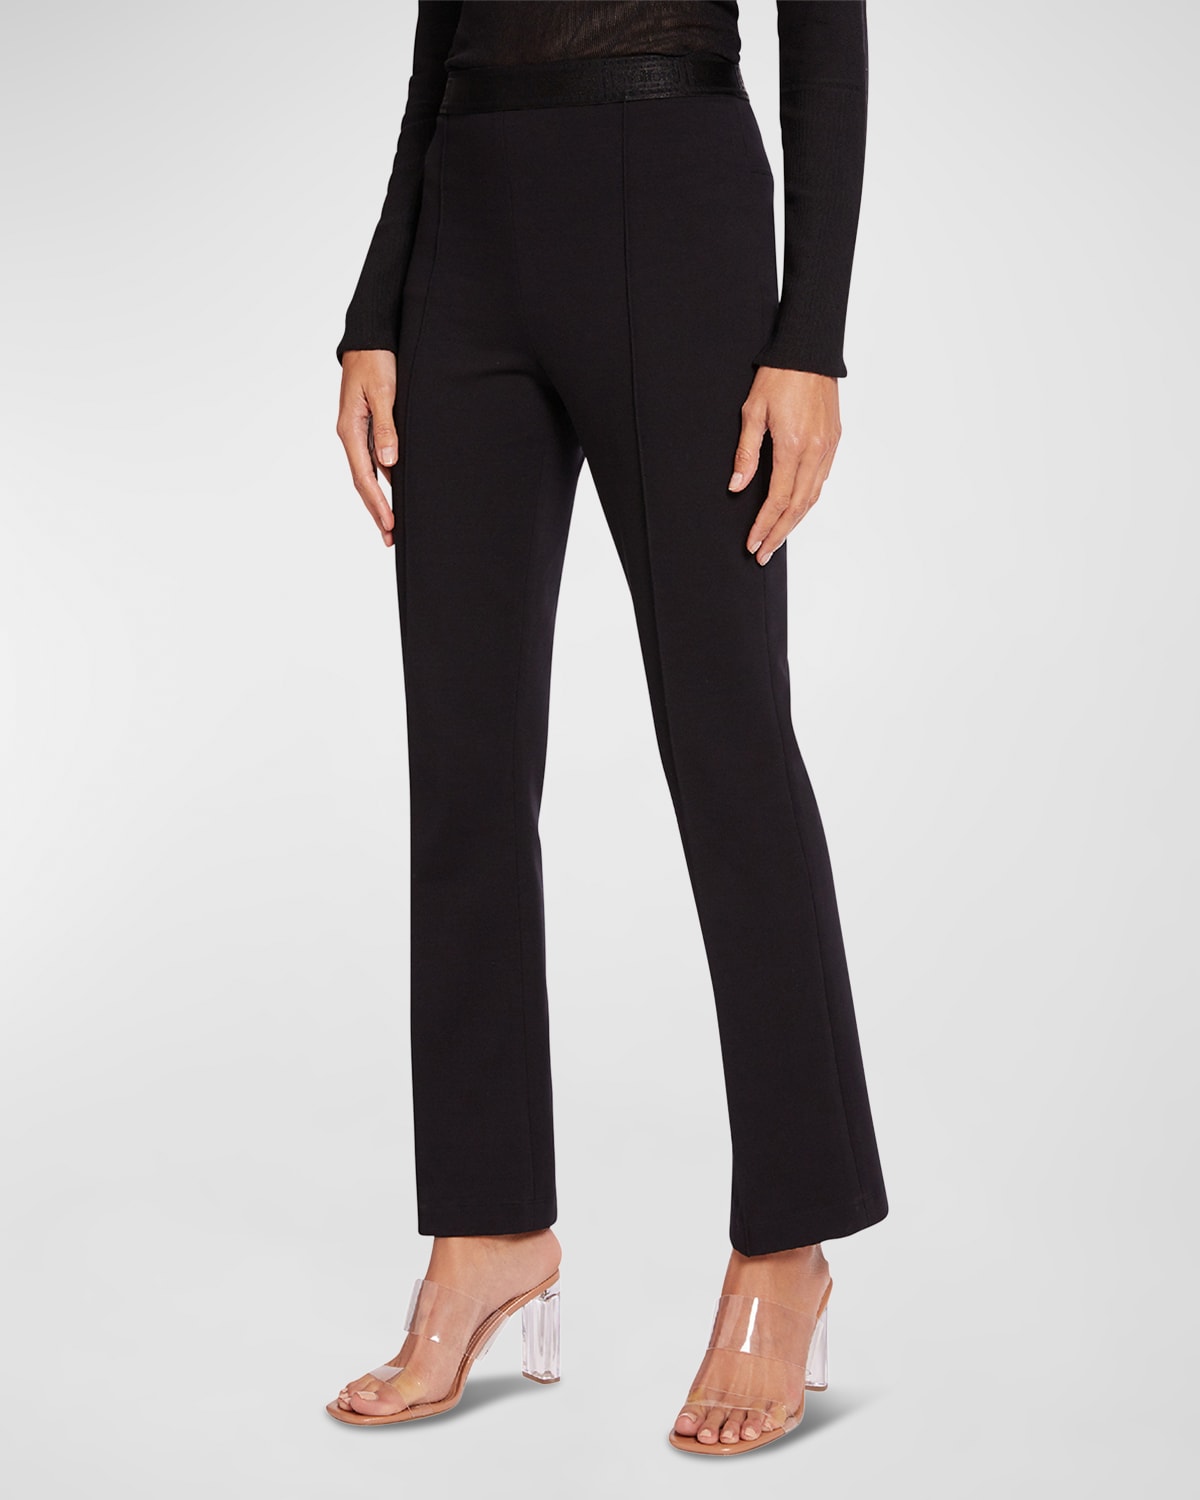 WOLFORD GRAZIA JERSEY TROUSERS